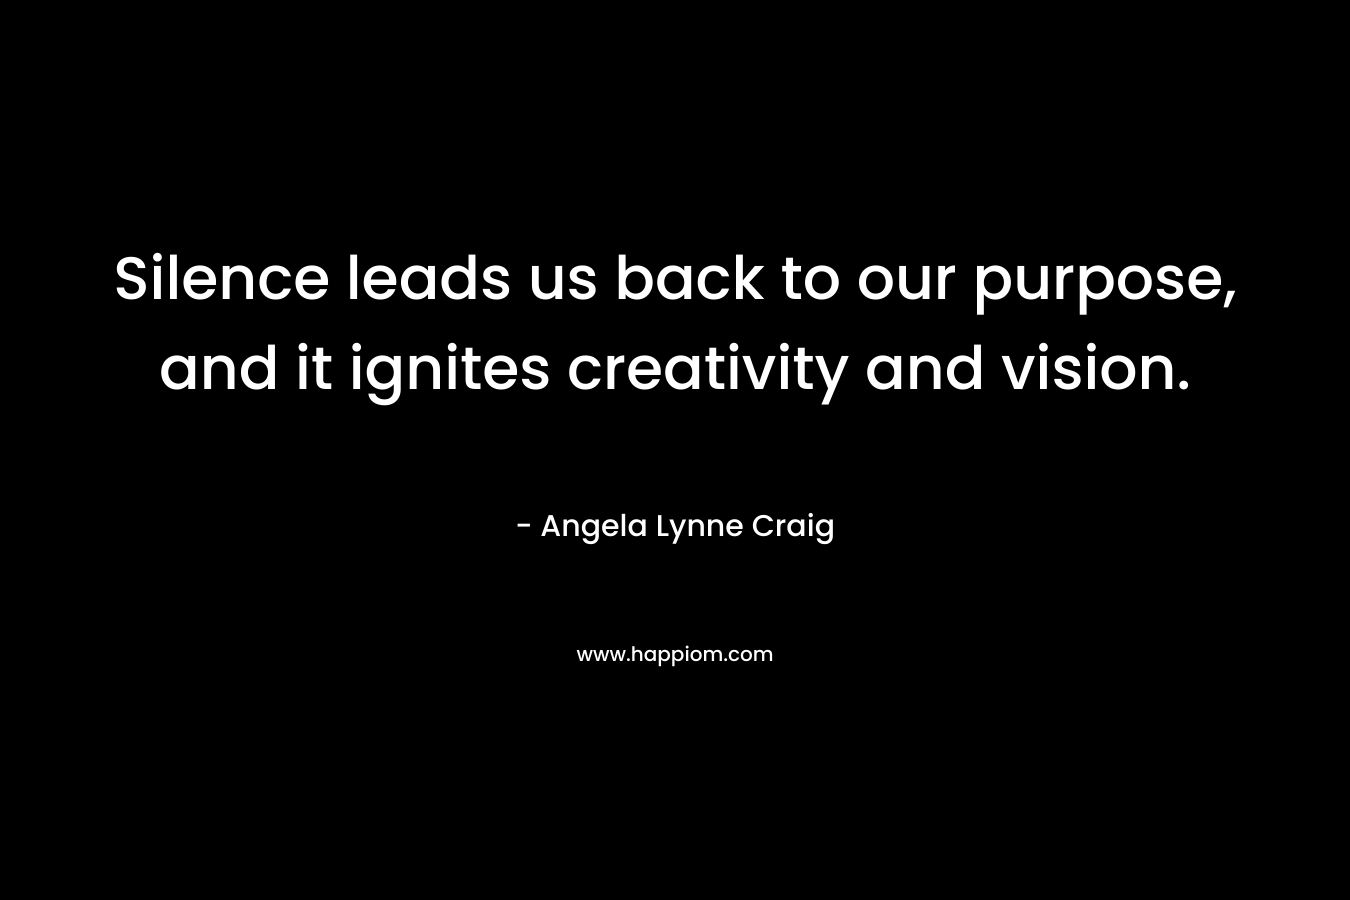 Silence leads us back to our purpose, and it ignites creativity and vision.